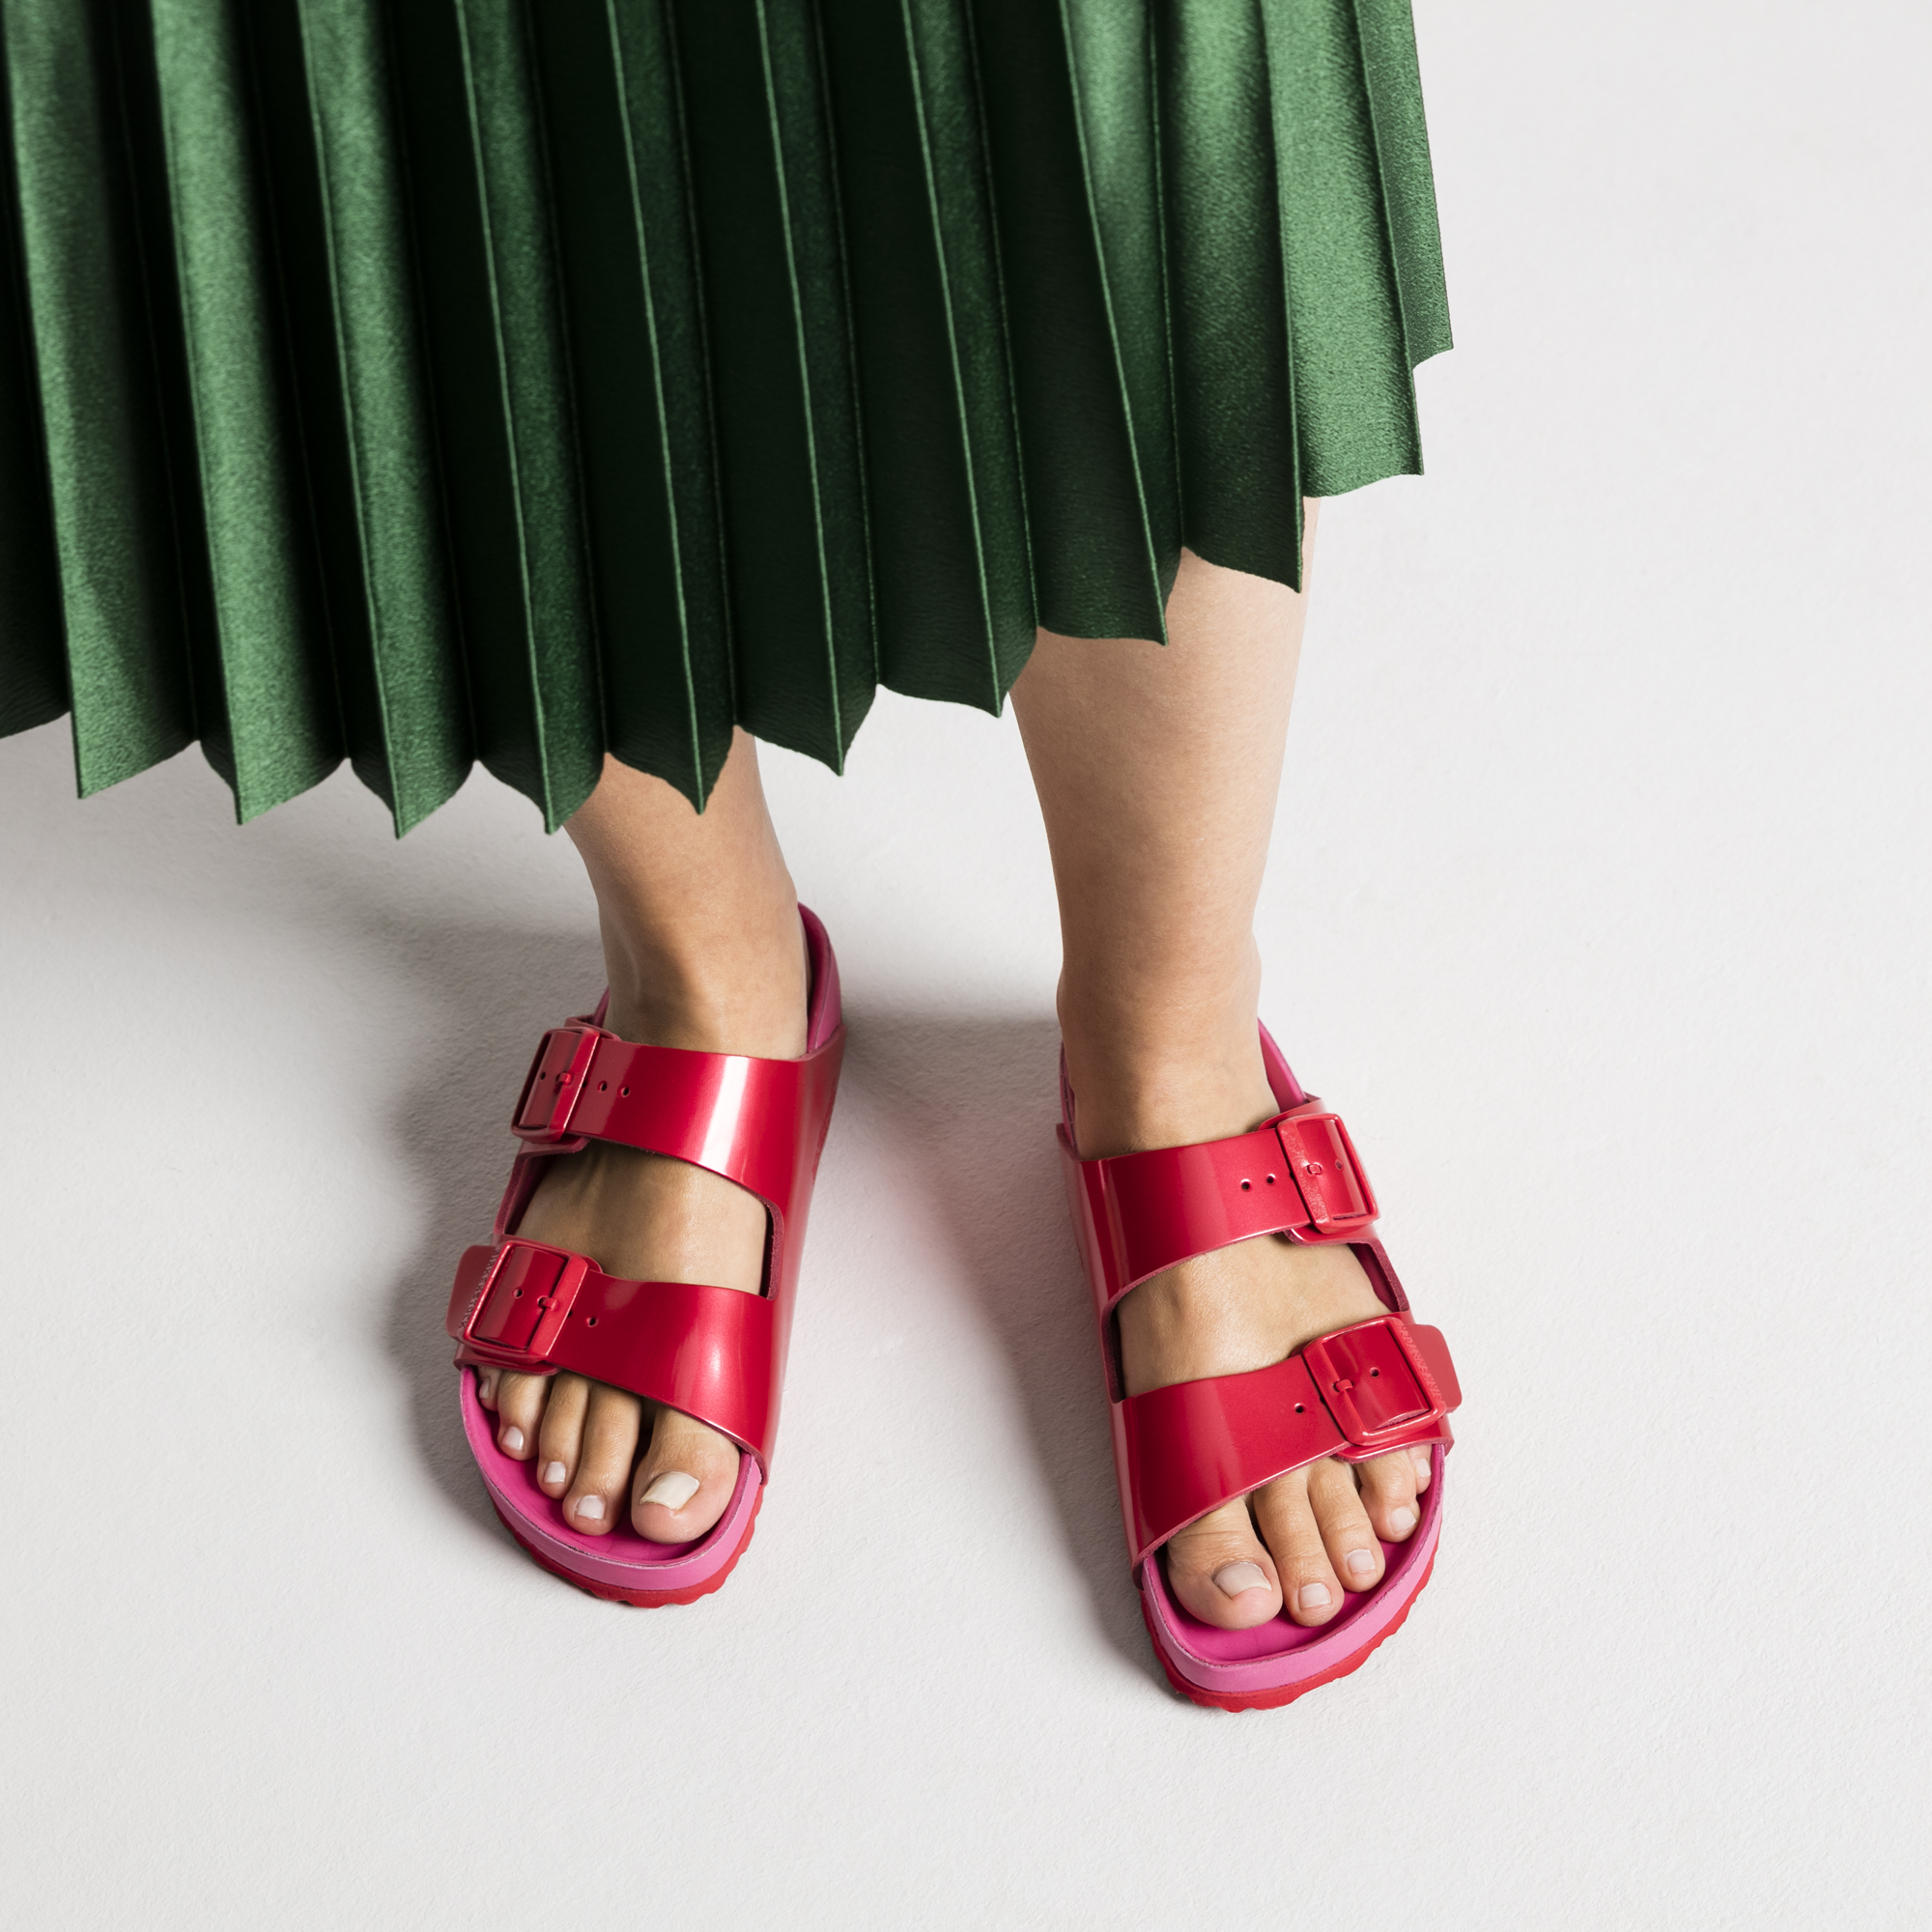 red and pink birkenstock